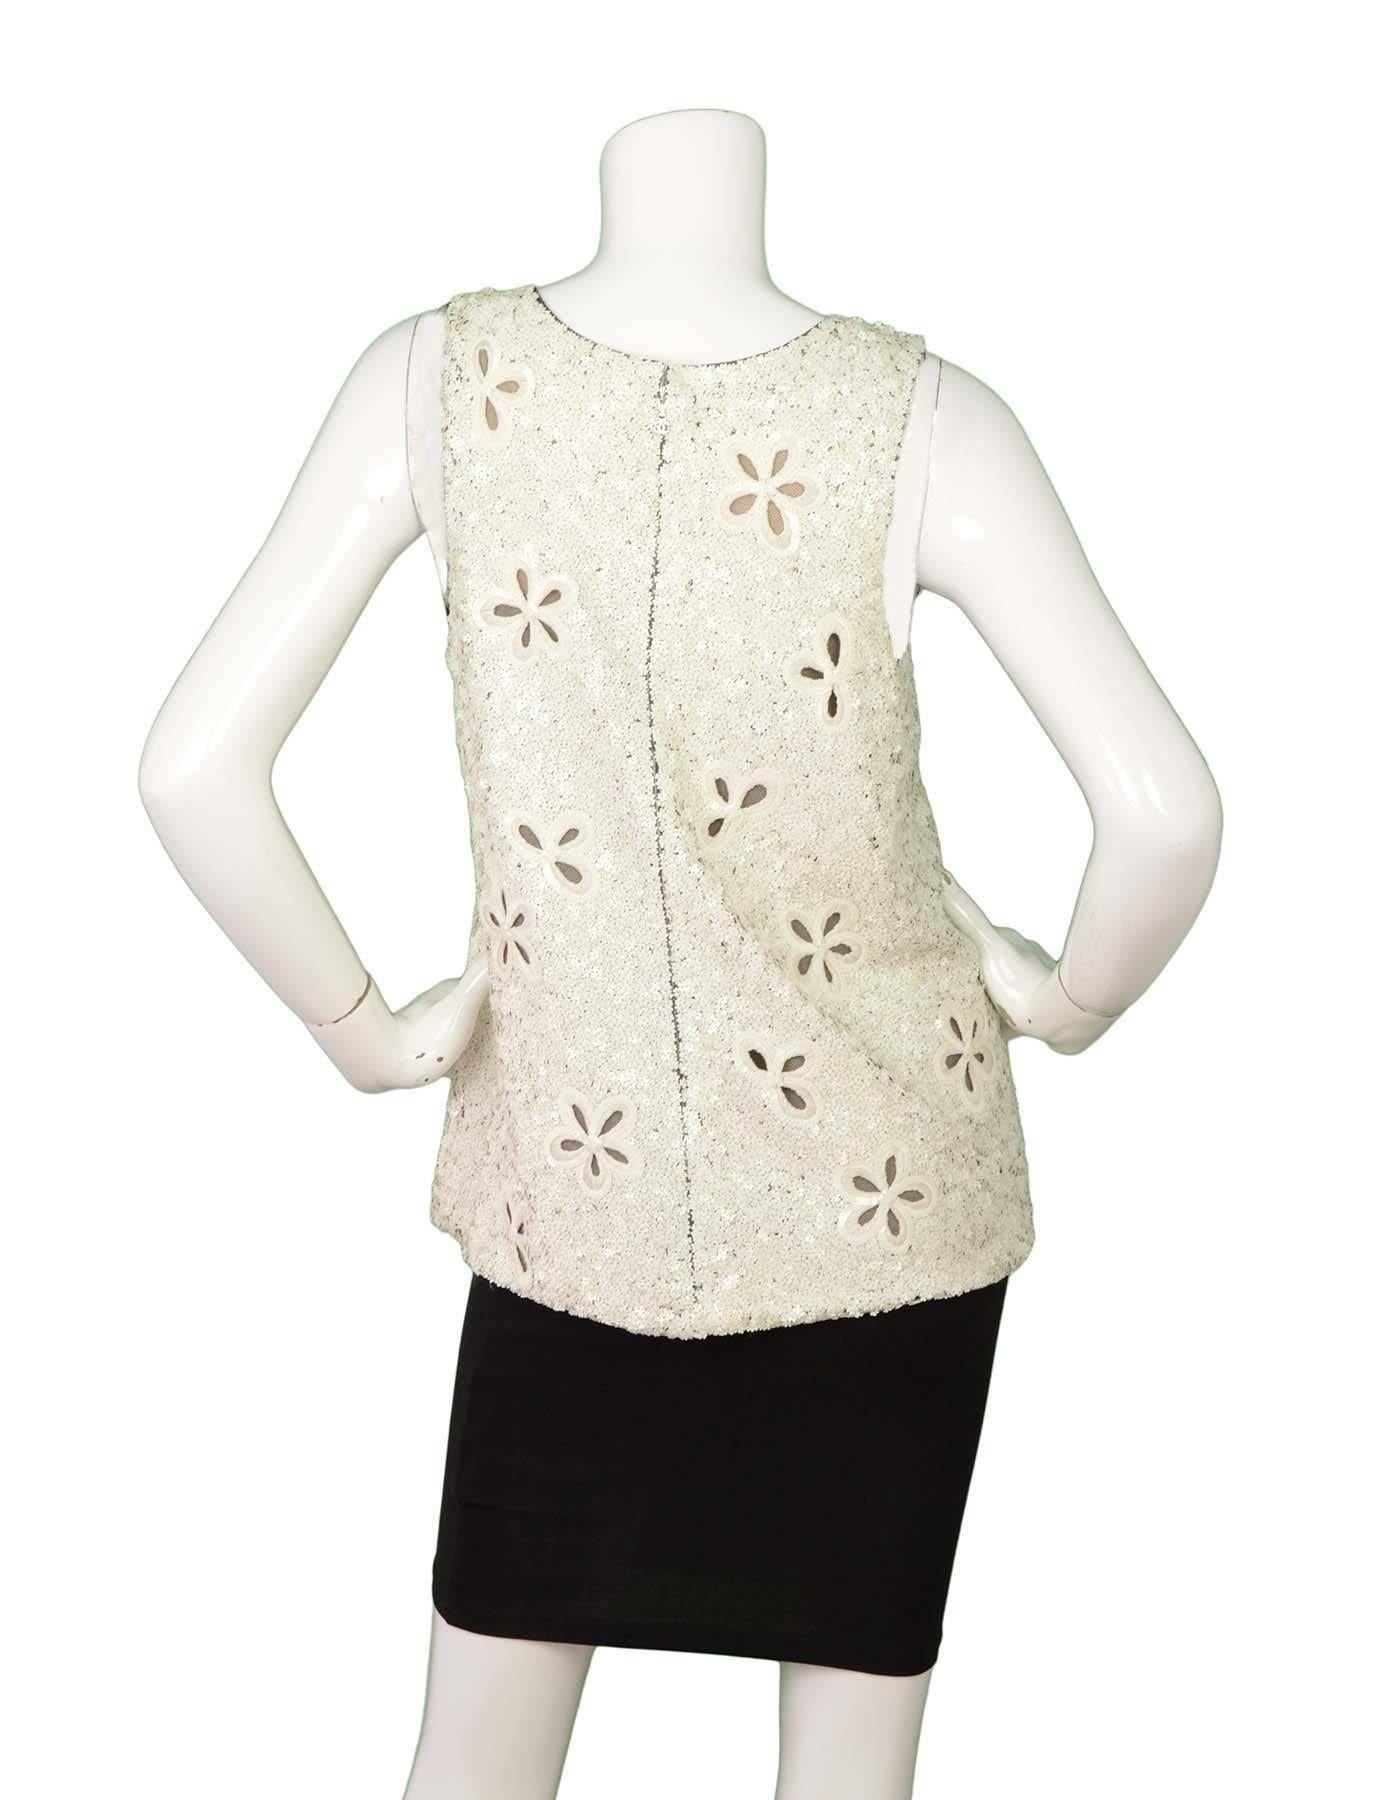 Chanel Ivory Cut out Floral Sequin Sleeveless Top sz 44 rt. $3, 000+ In Excellent Condition In New York, NY